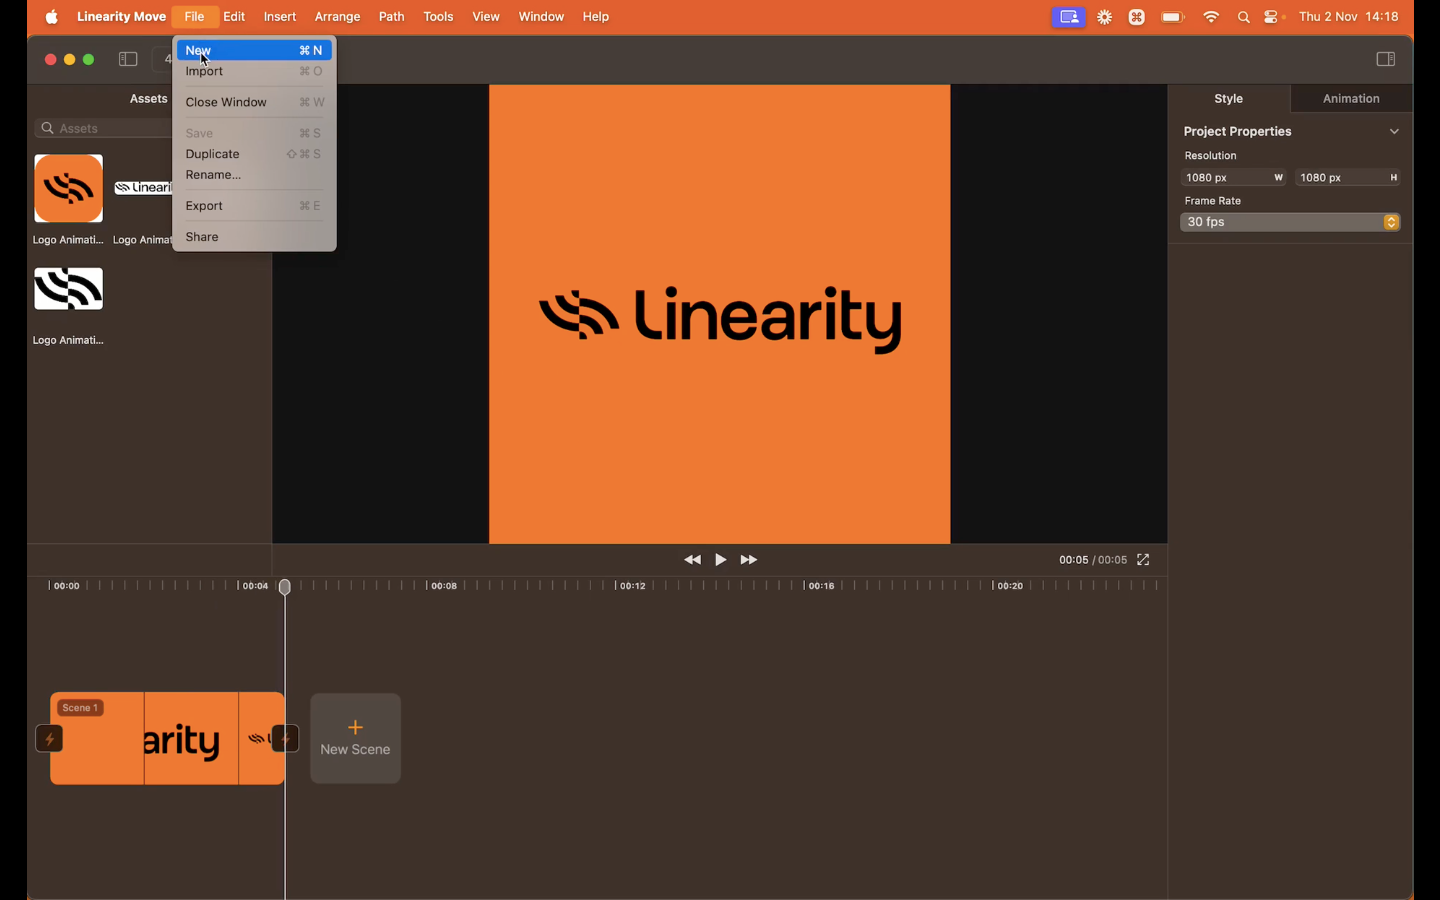 How to animate a logo + linearity + scene 1